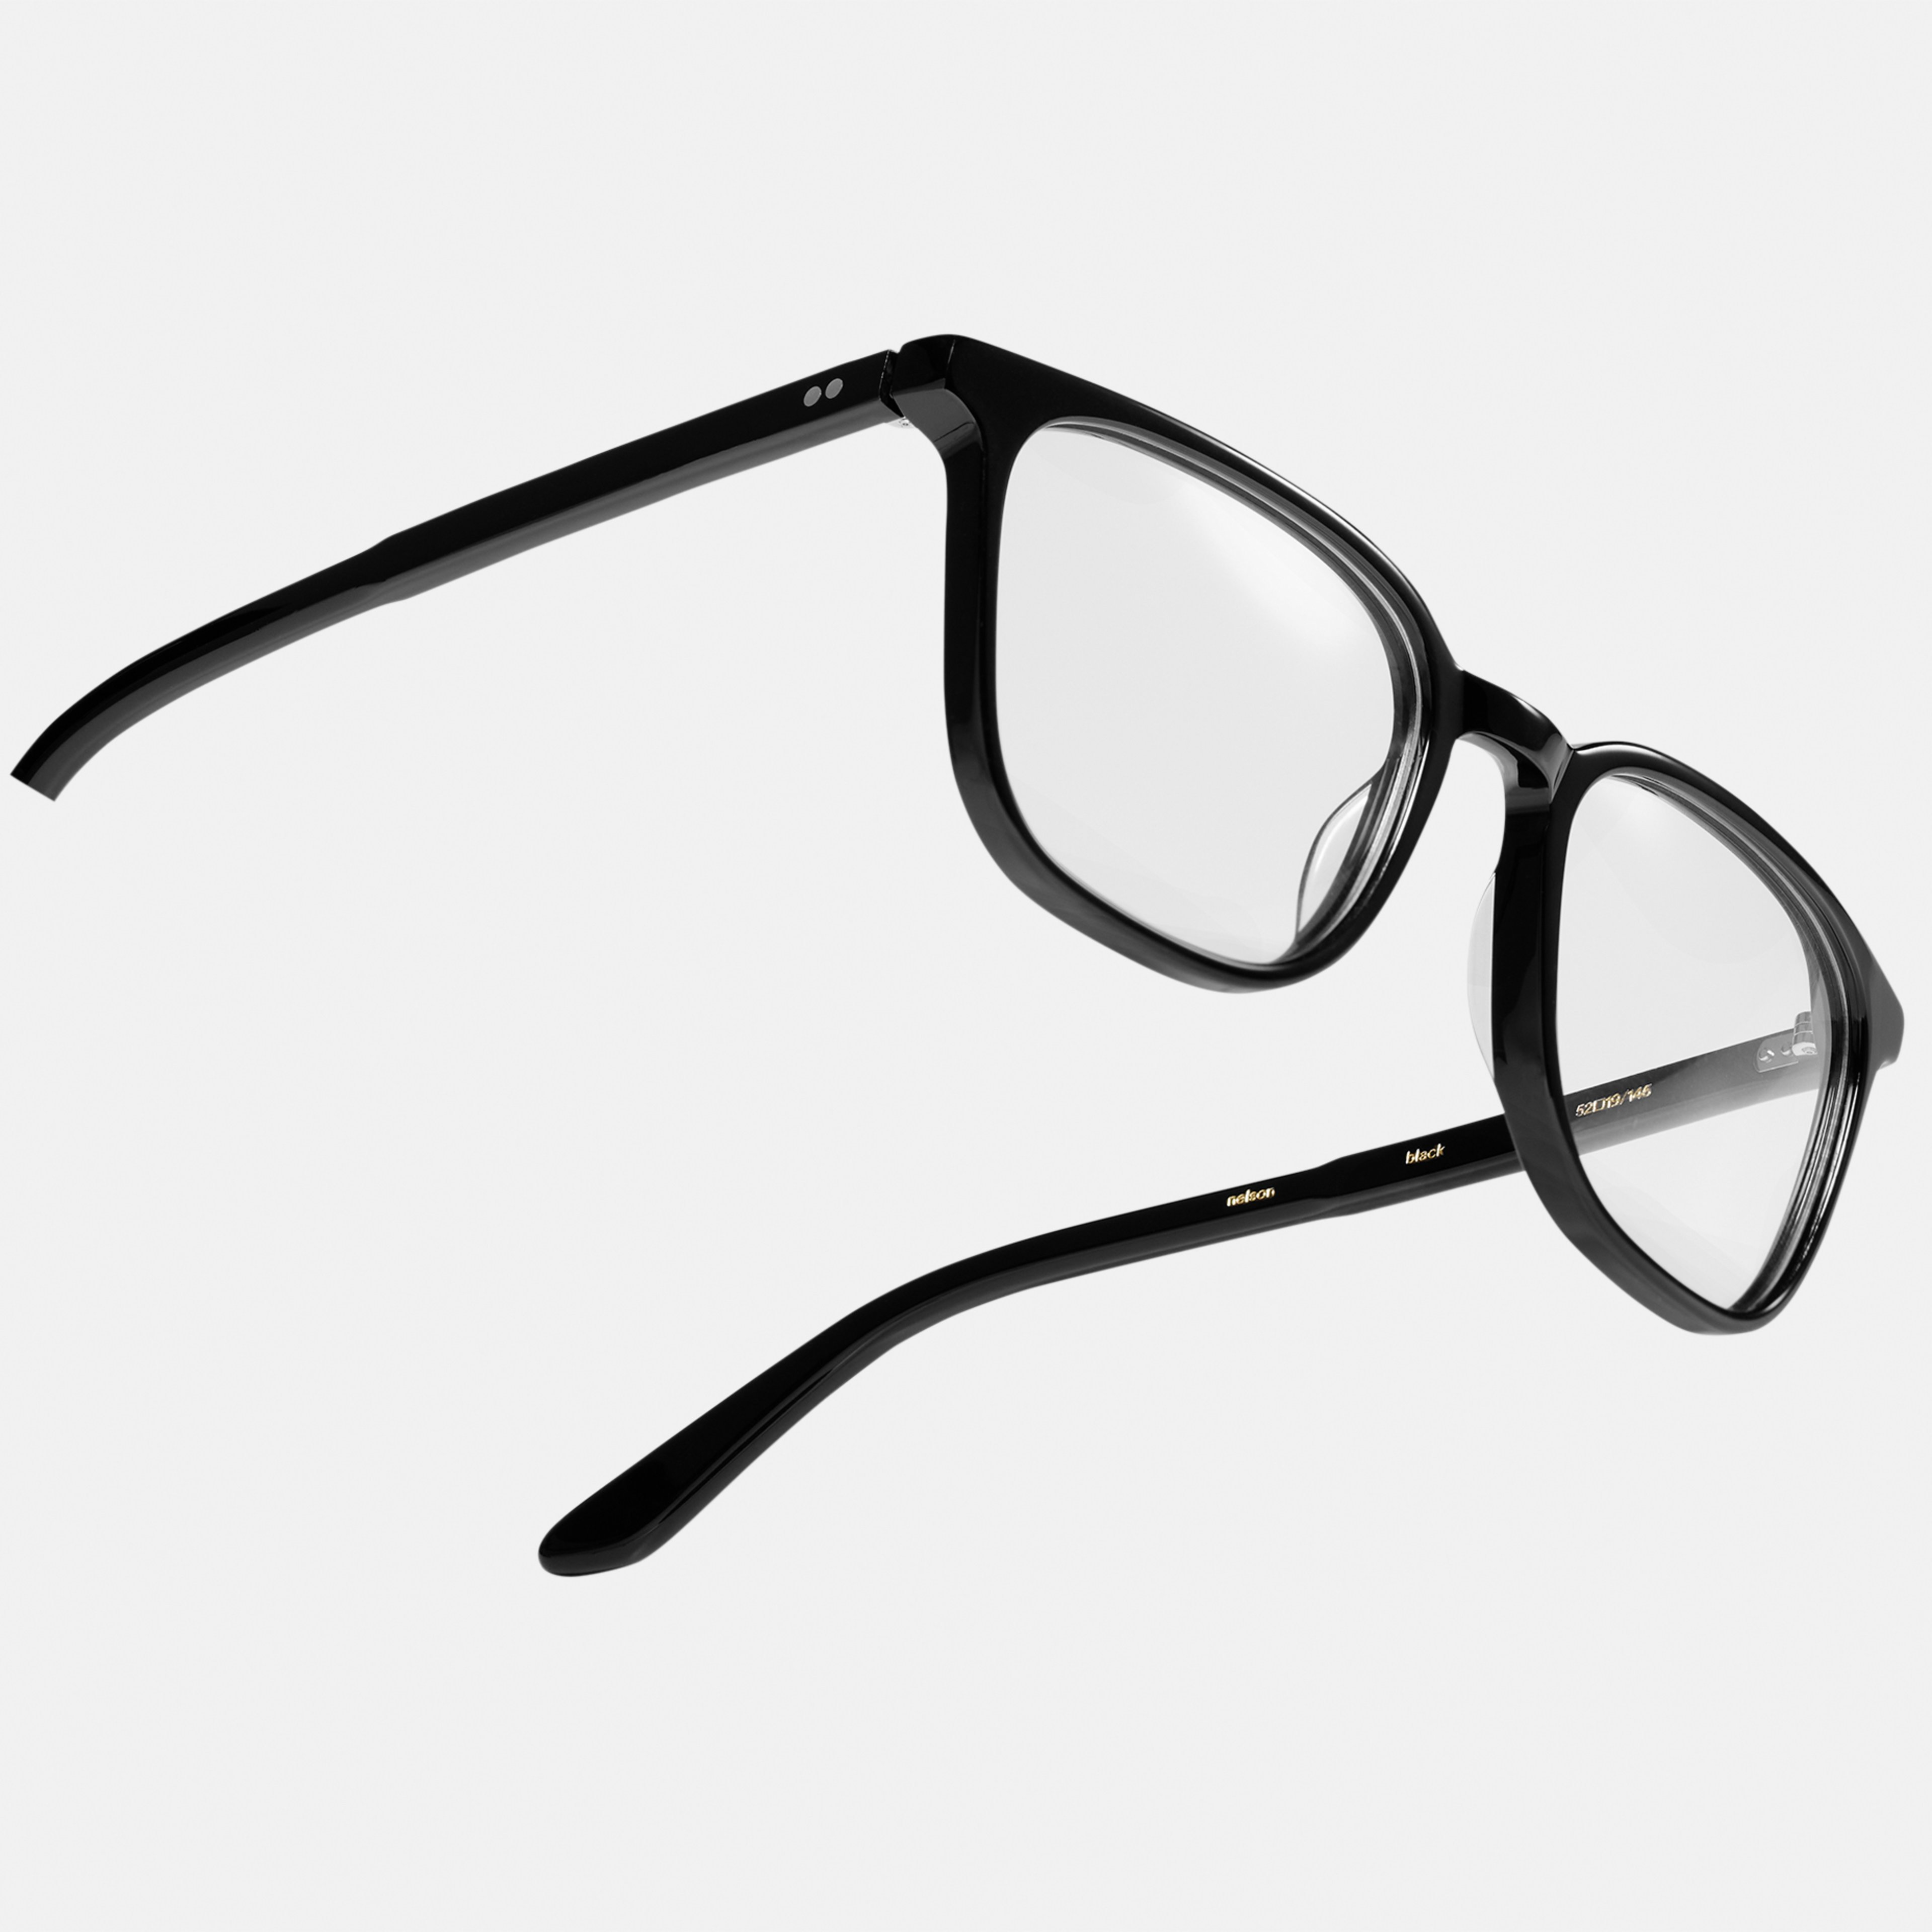 Ace & Tate Glasses | rectangle Acetate in Black